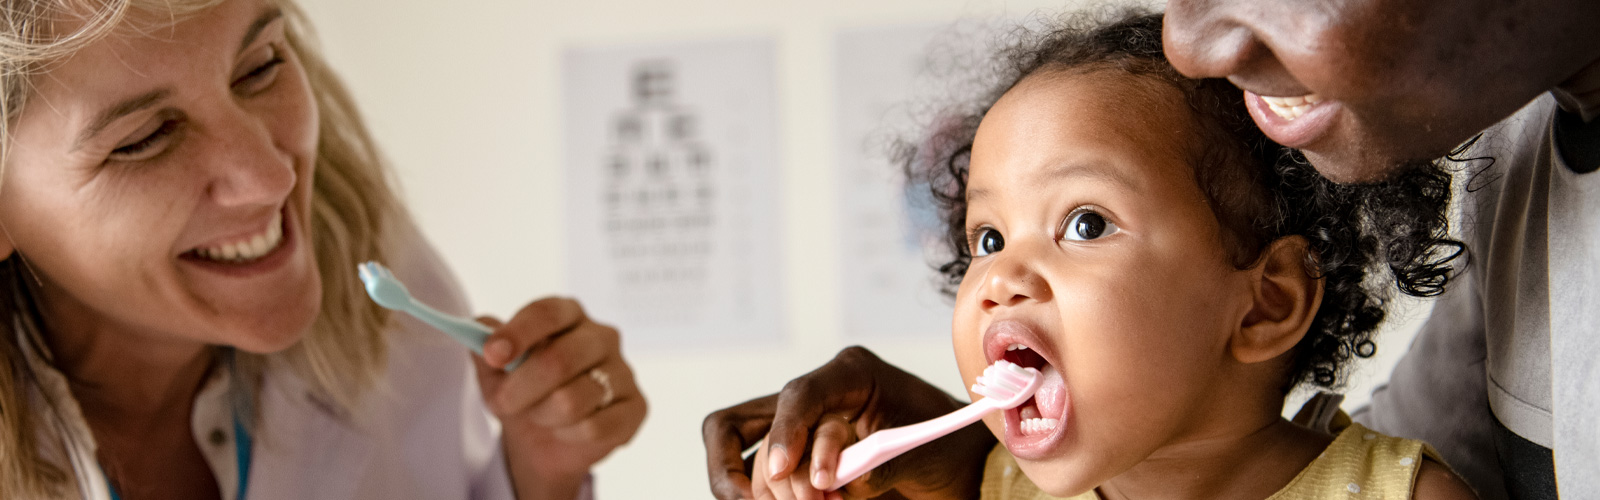 Baby Teeth Could Help Identify Kids at Risk for Mental Disorders Later in Life